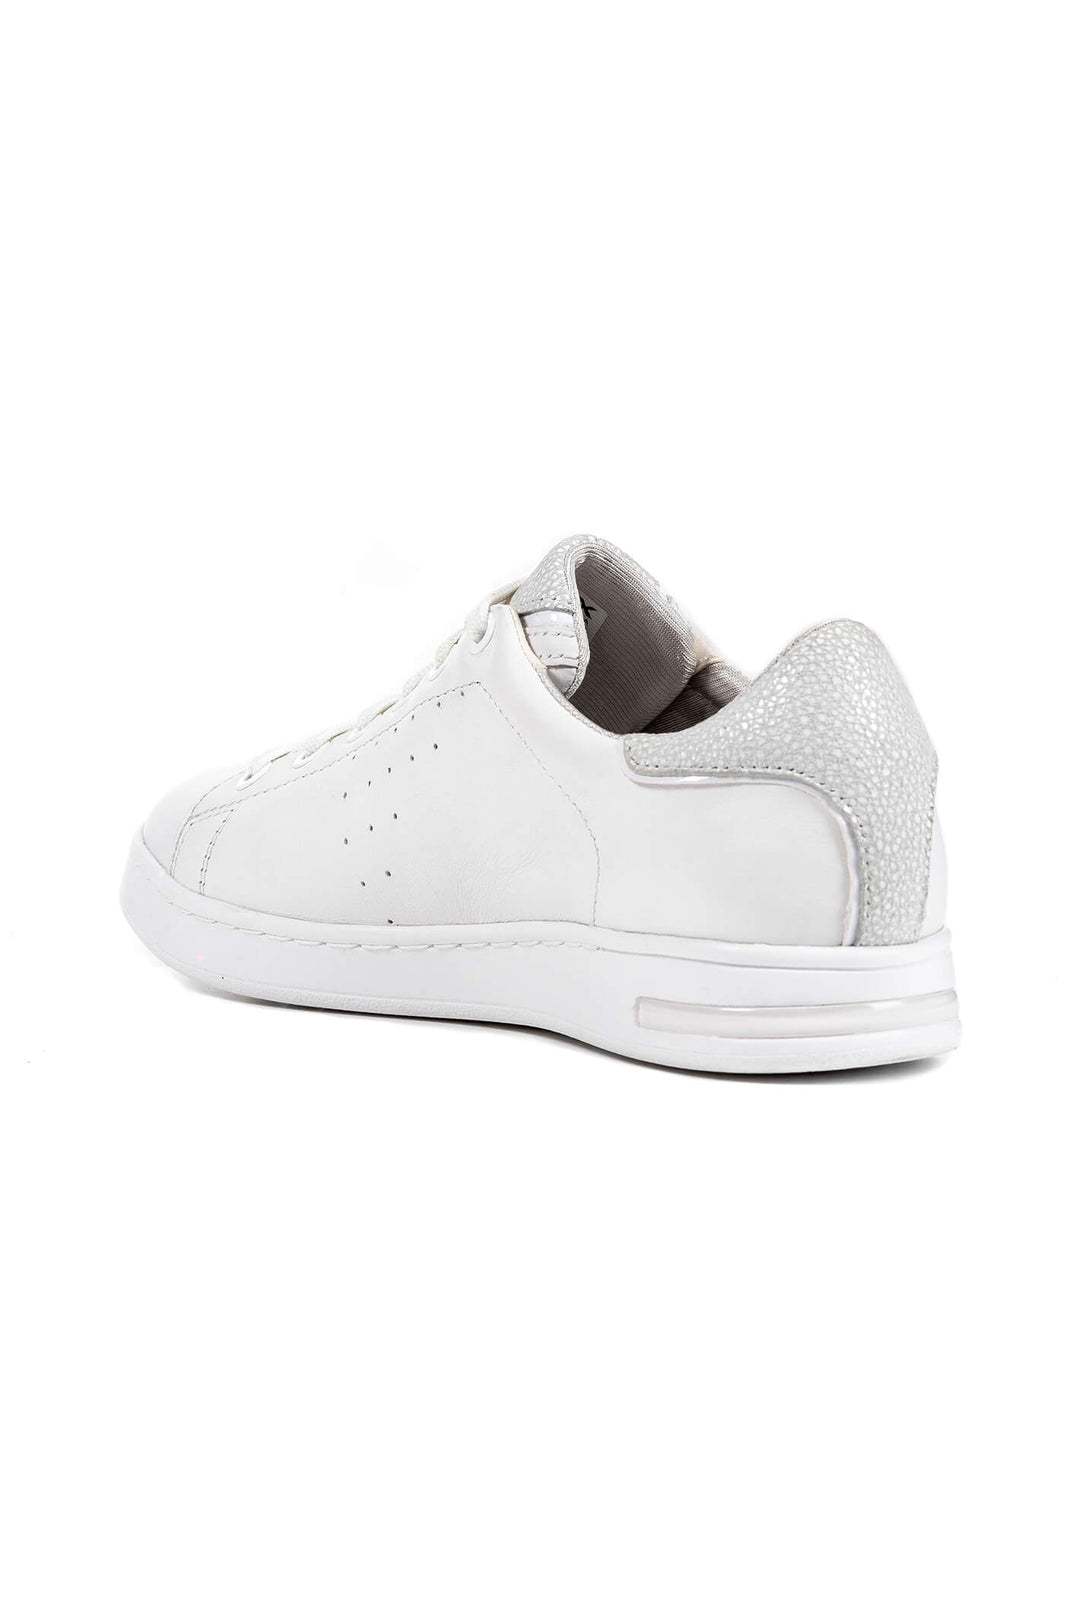 Geox D621BA Jaysen White Nappa Leather Trainers - Dotique